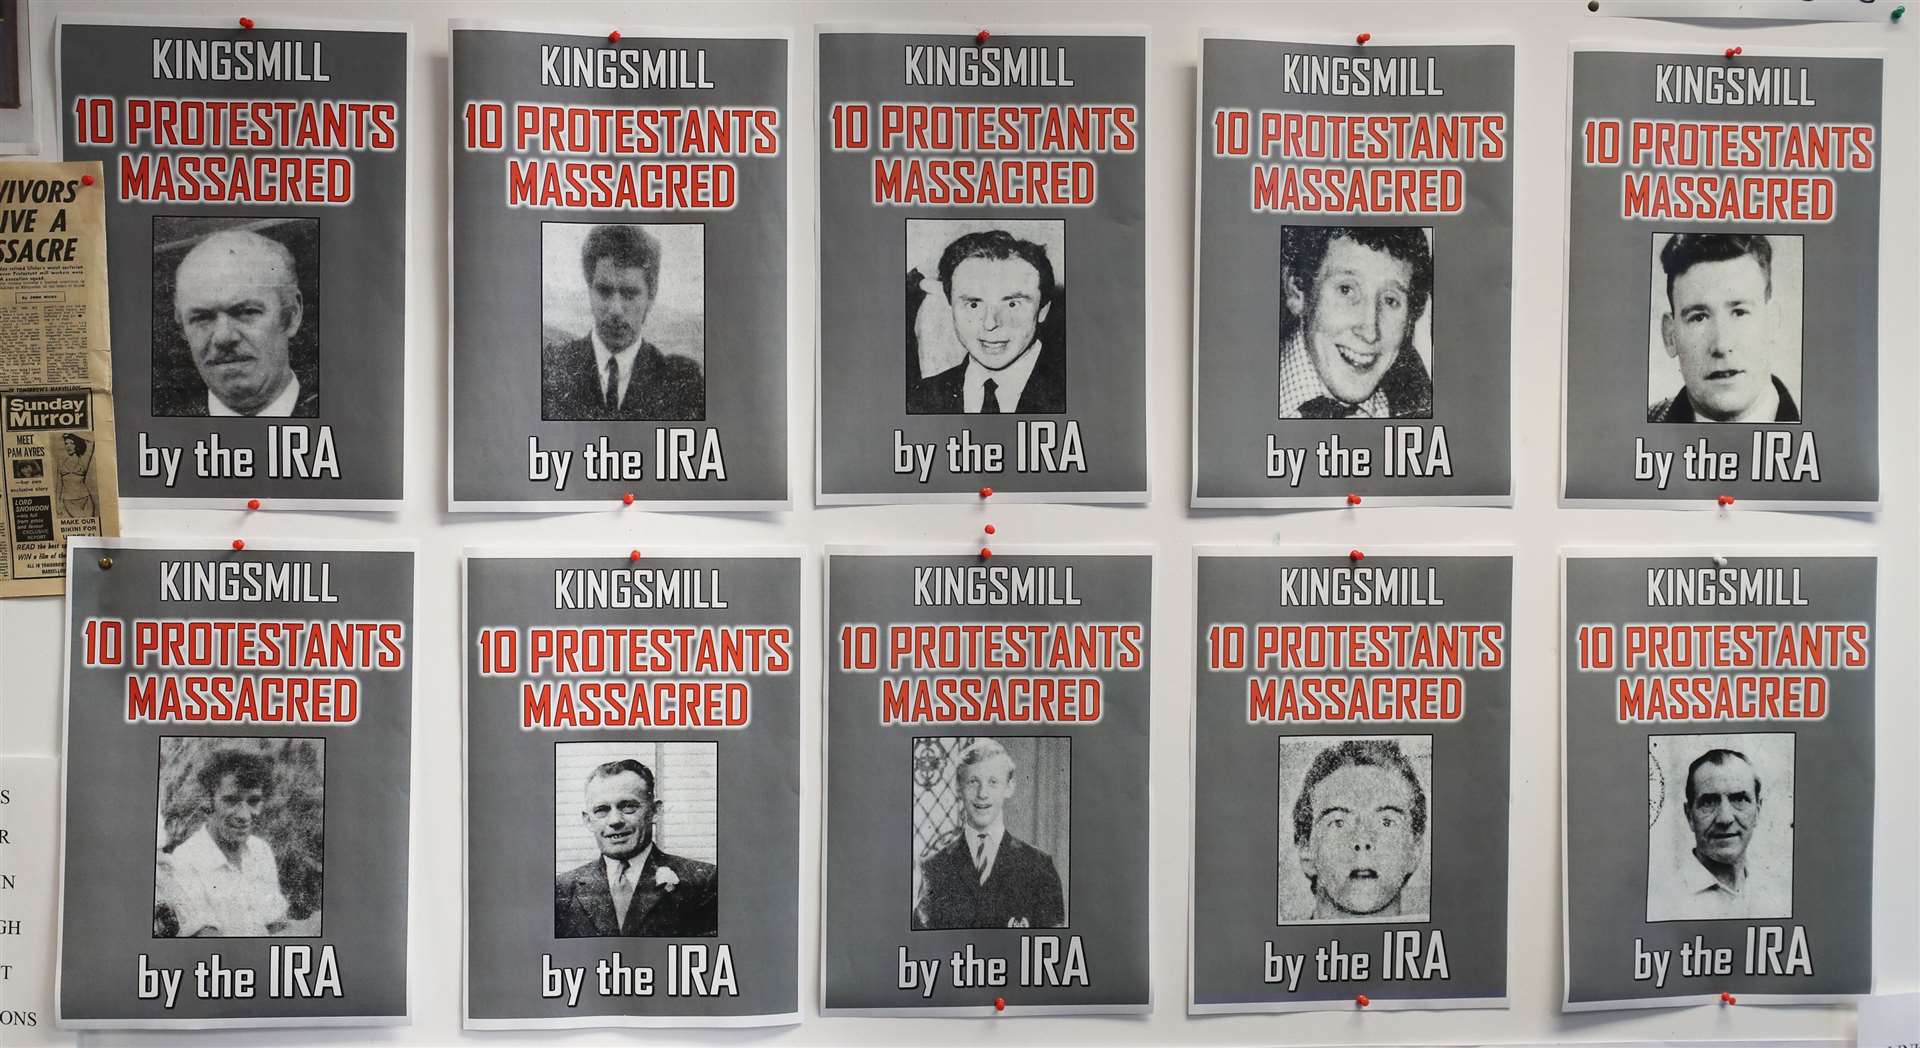 Posters of the 10 Protestant workmen killed in the Kingsmill massacre in 1976 (Niall Carson/PA)